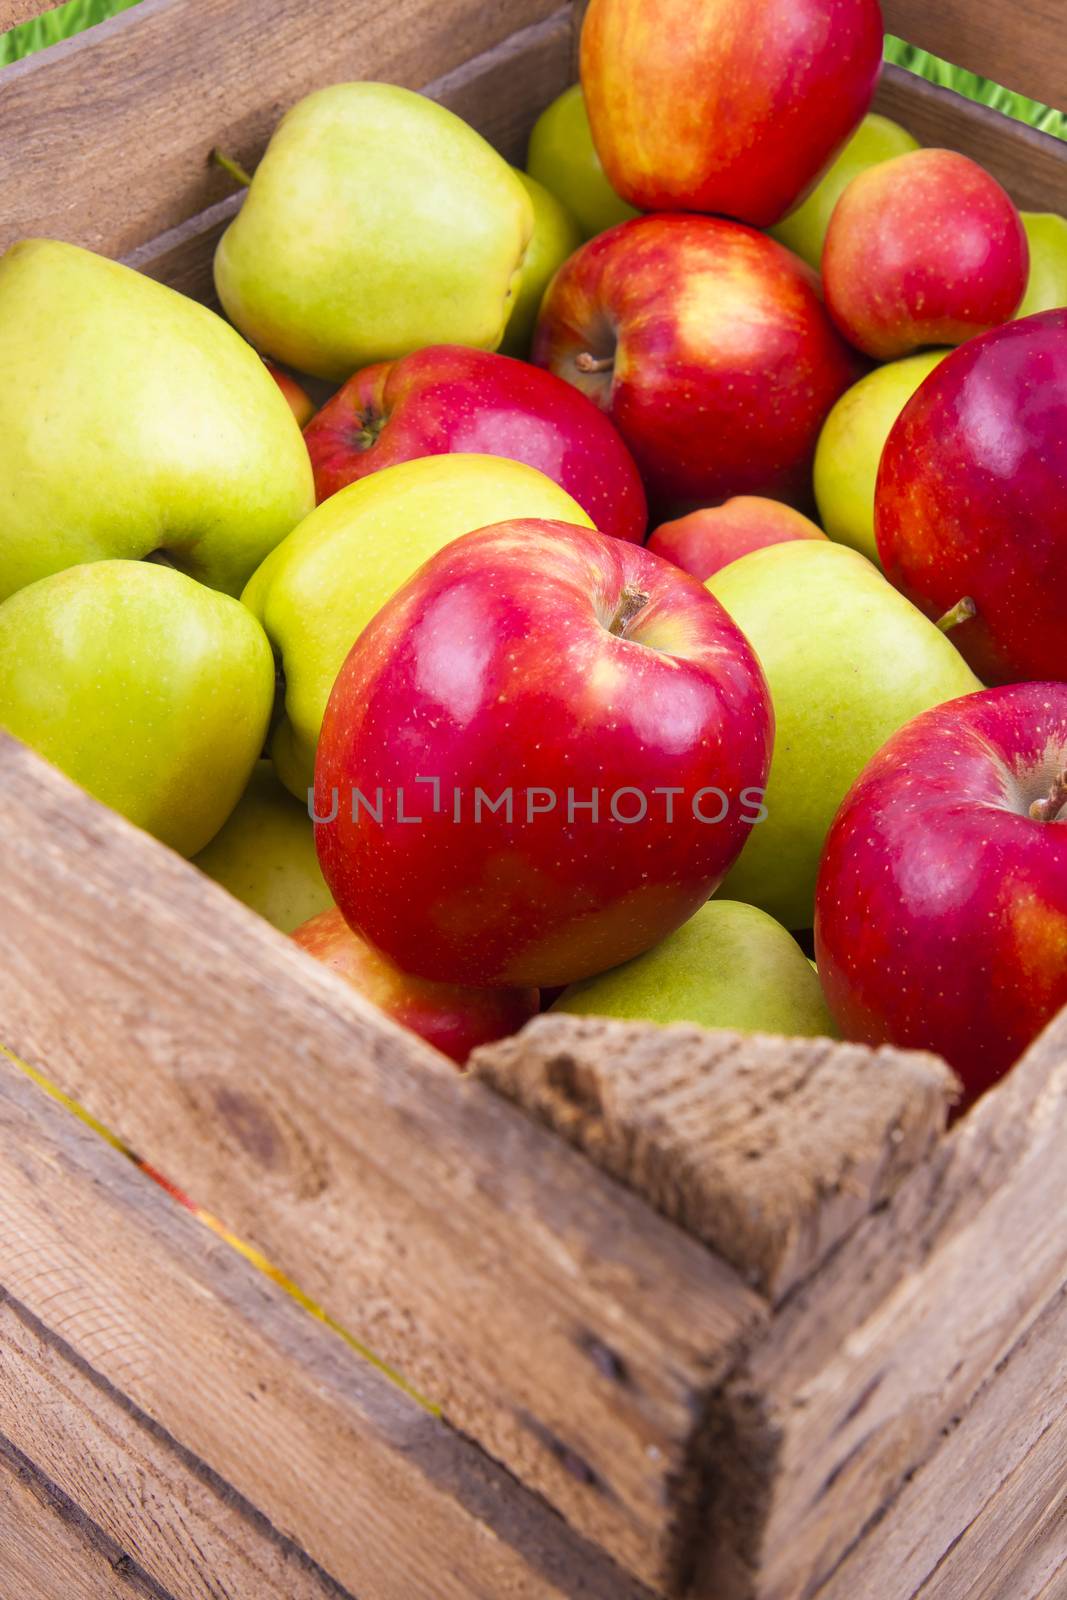 Fresh green and red apples in a wooden box, fruits